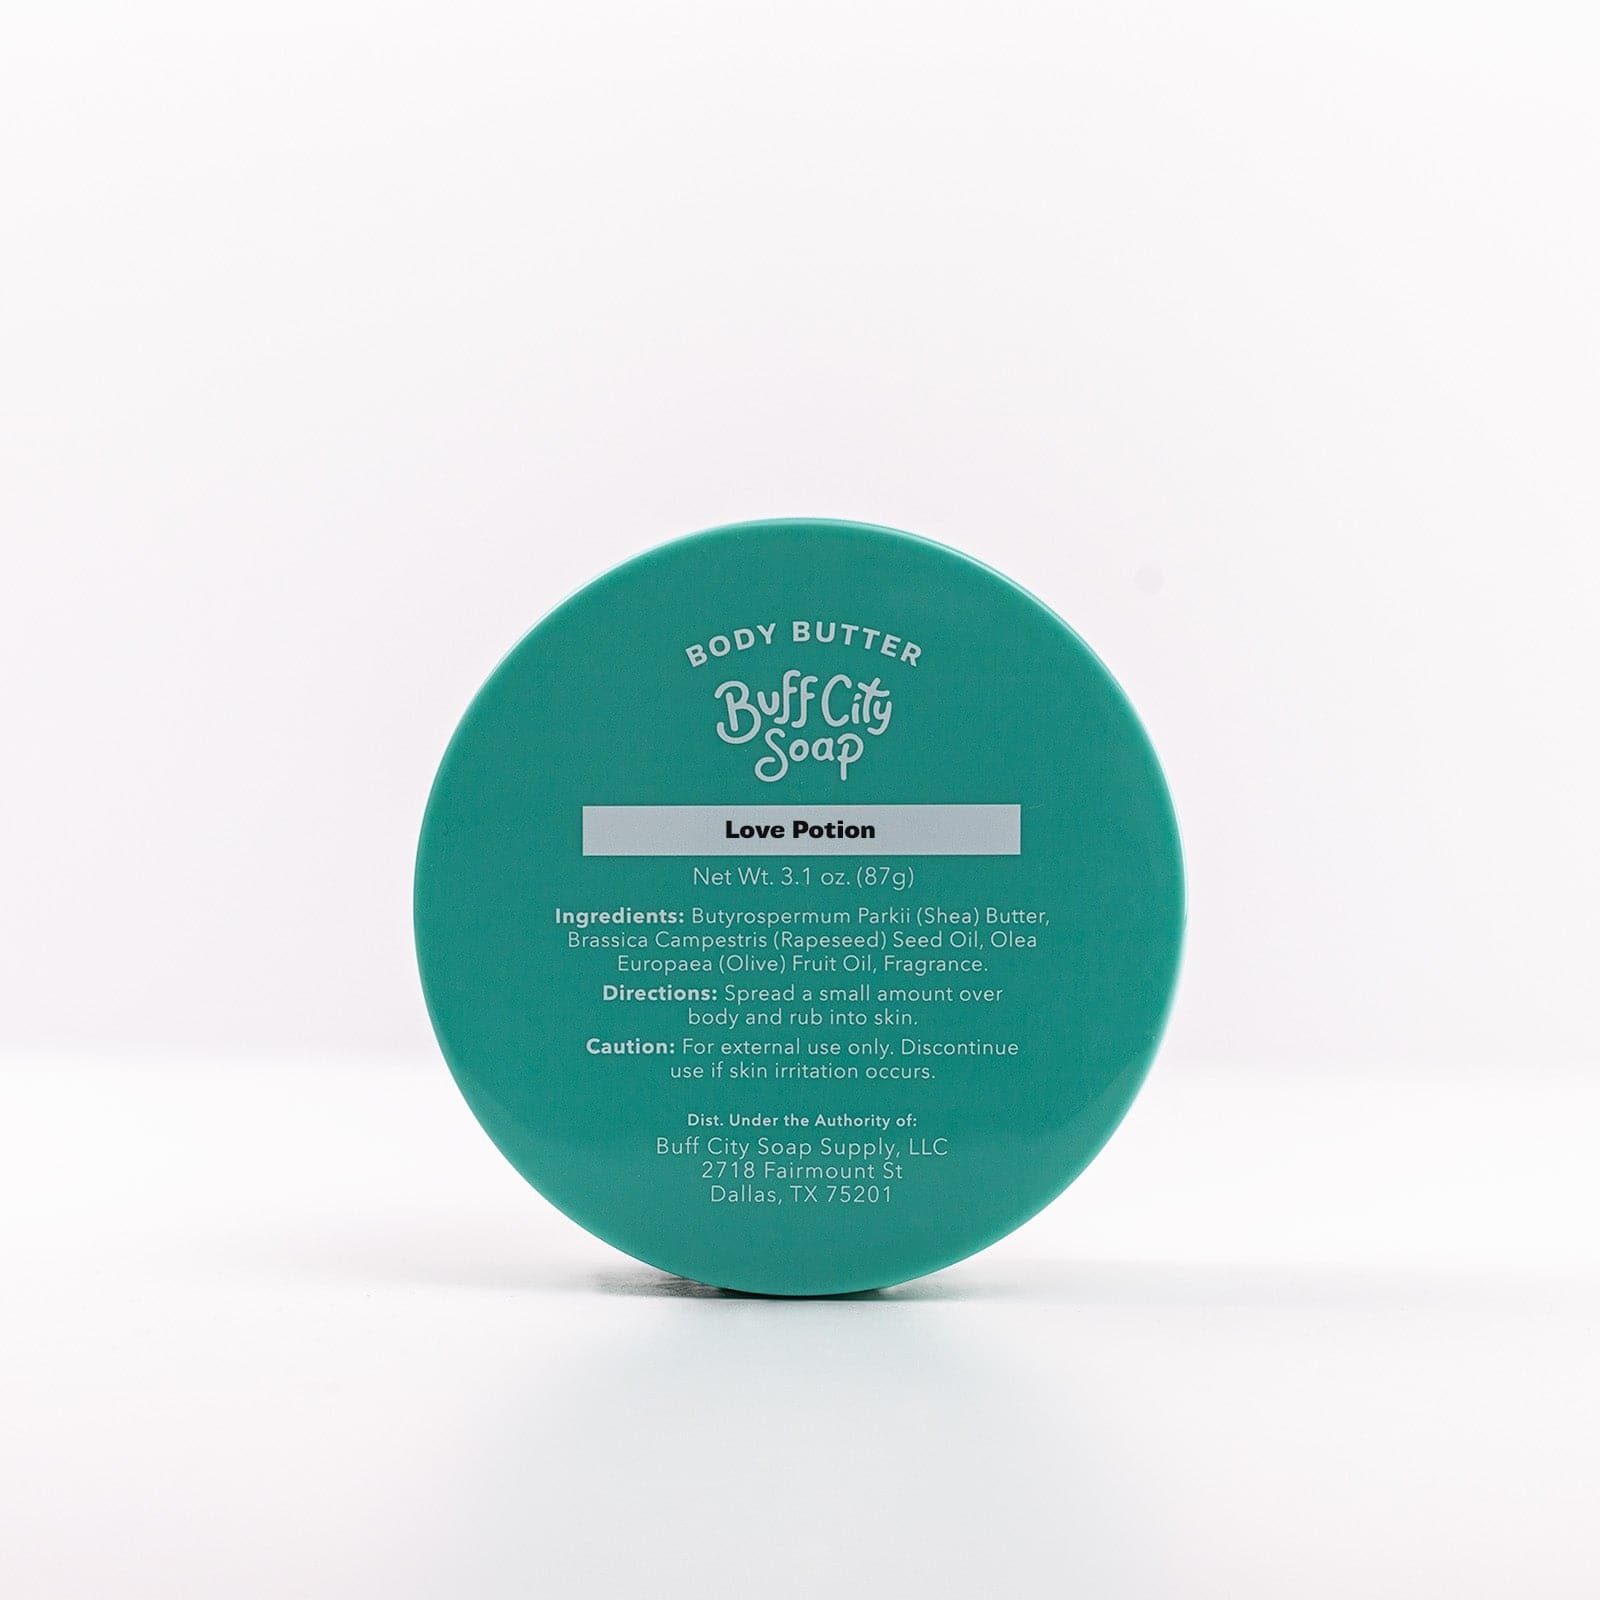 Buff City Soap's love potion body butter lid with directions, ingredients, and caution listed on it